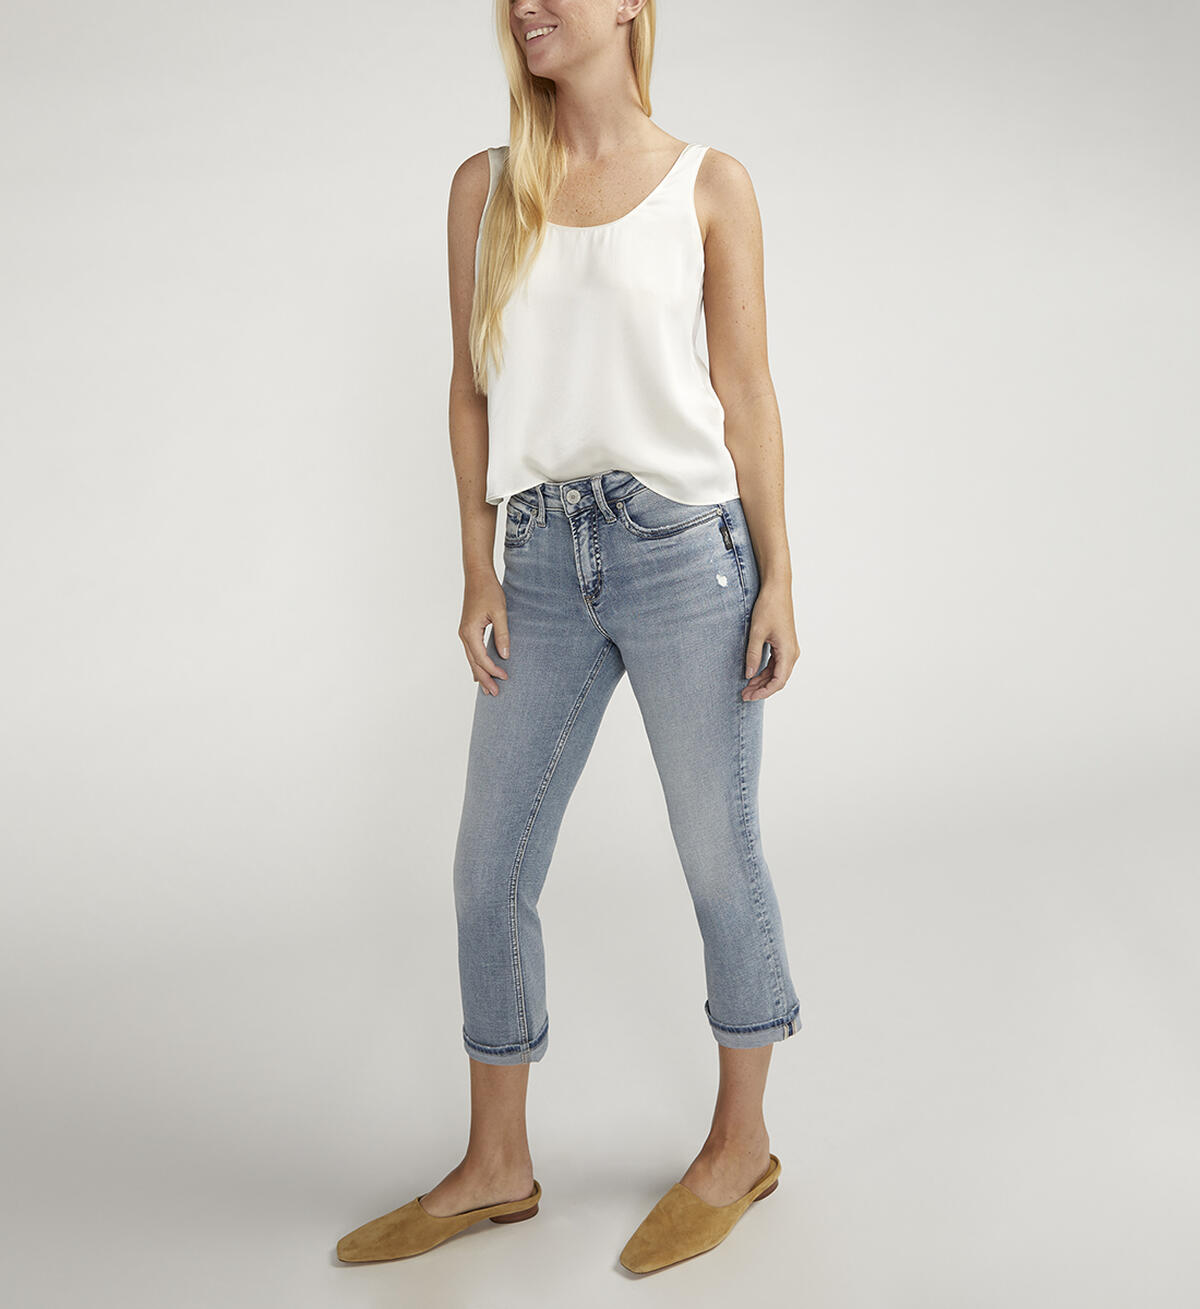 Suki is the best-selling Silver Jeans Co.™ curvy fit for good reason. Designed to enhance curves, this pair creates a flattering silhouette with ease in the hip and thigh to hug every angle. The classic mid rise is comfortable, and the contoured waistband ensures a zero-gap fit.